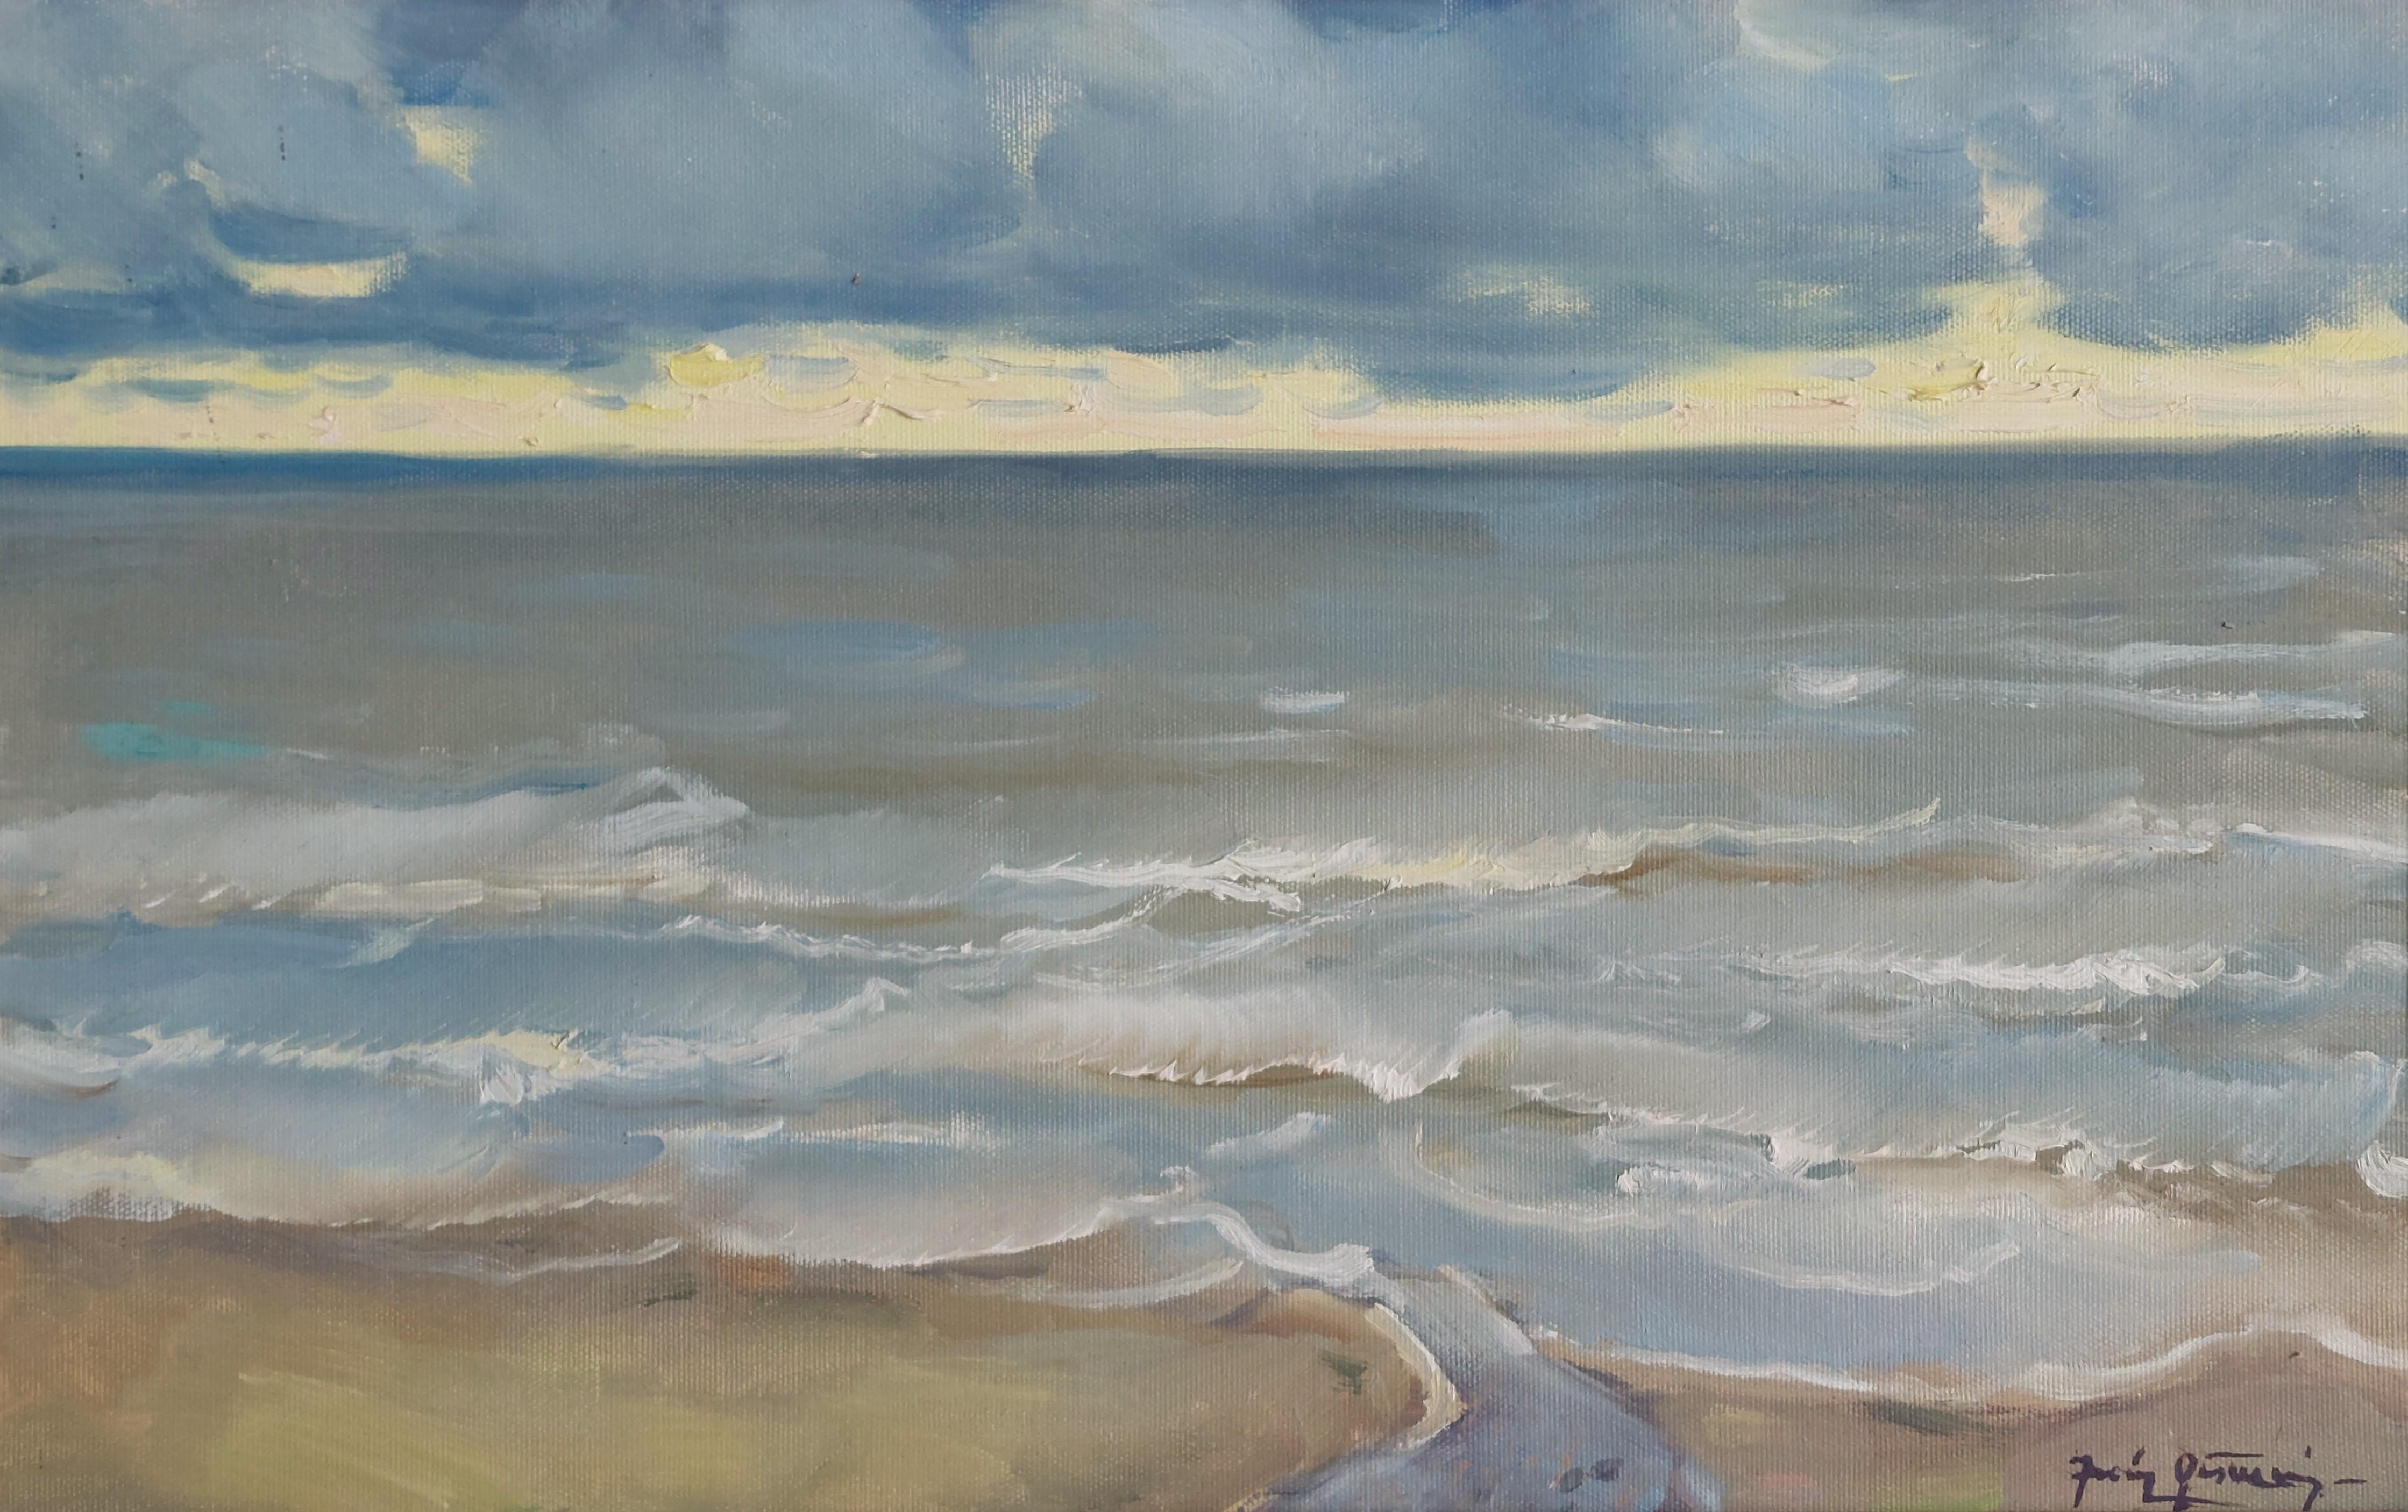 Juris Germanis Landscape Painting - Evening by the sea. 2008. Oil on canvas. 35x55 cm